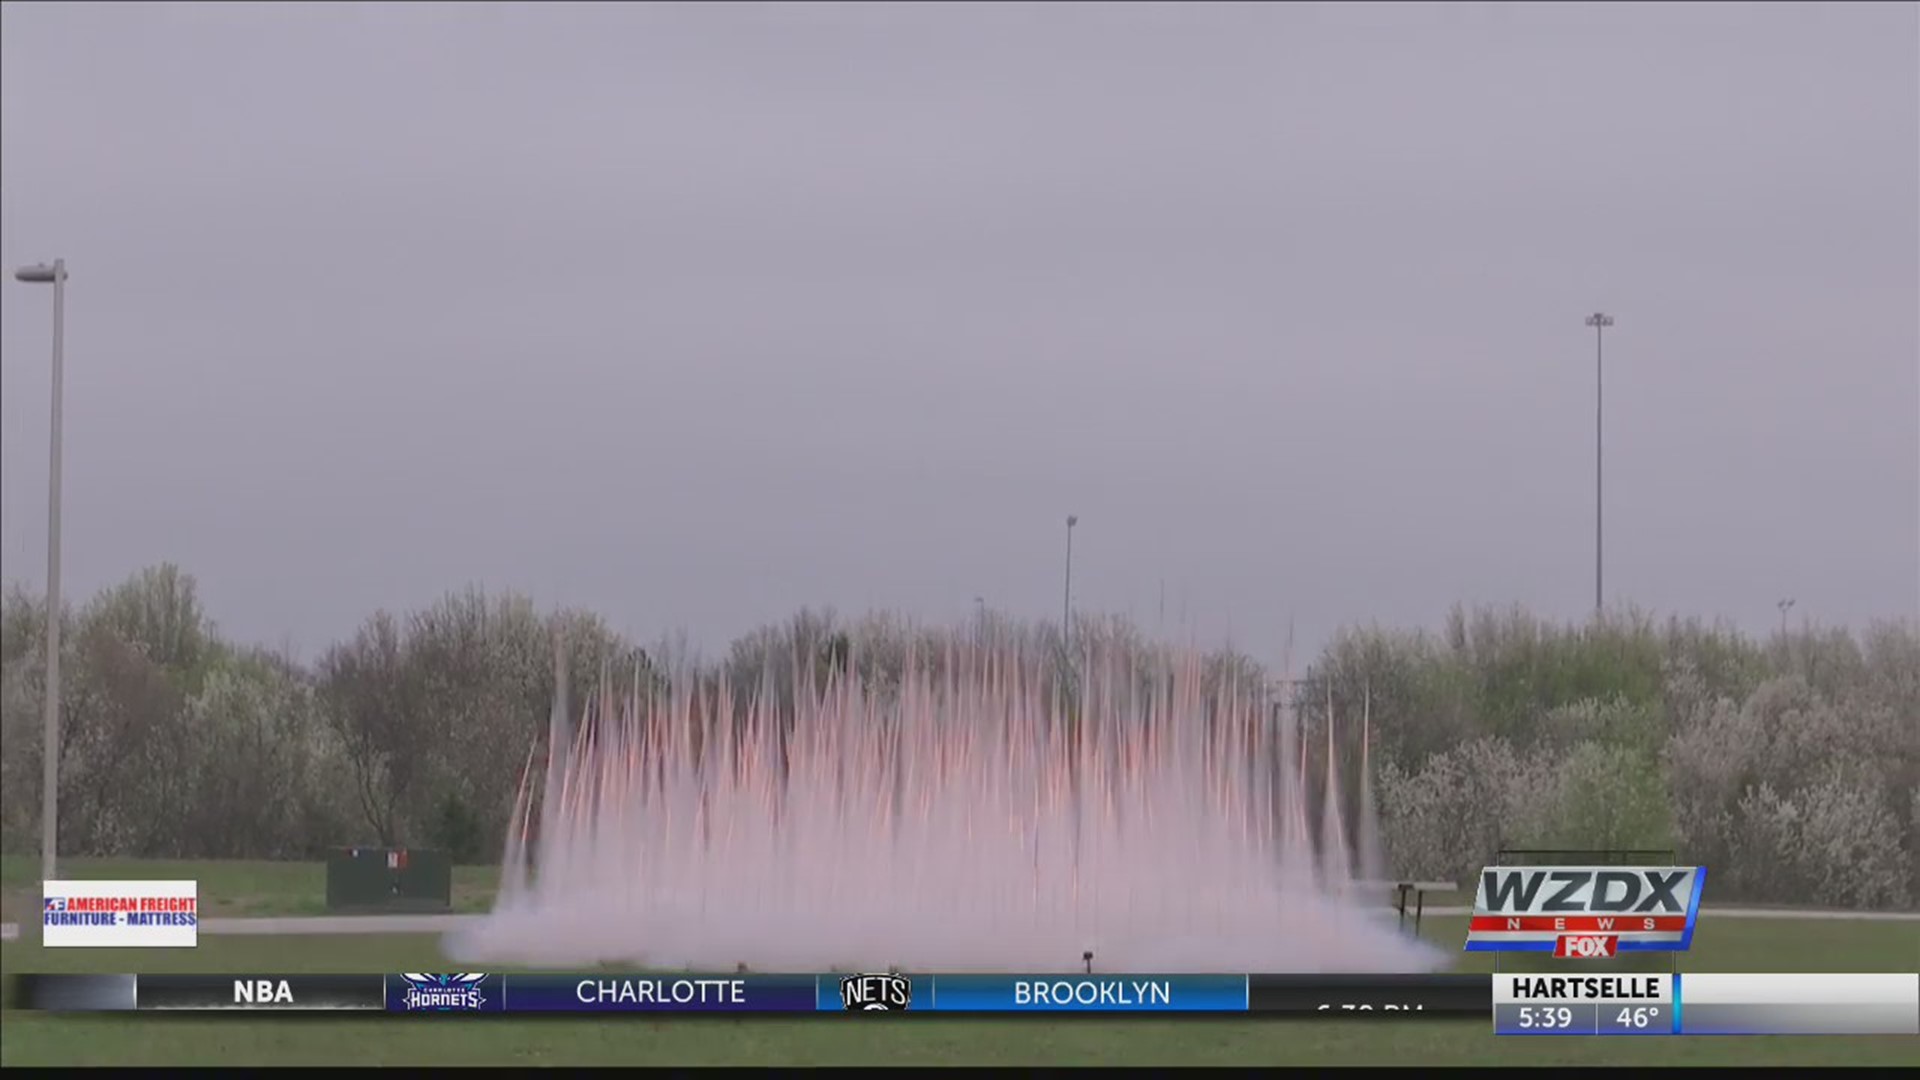 The U.S. Space & Rocket Center blasted off with 300 mini rockets to prepare for their world record breaking attempt of 5,000 rockets in July.